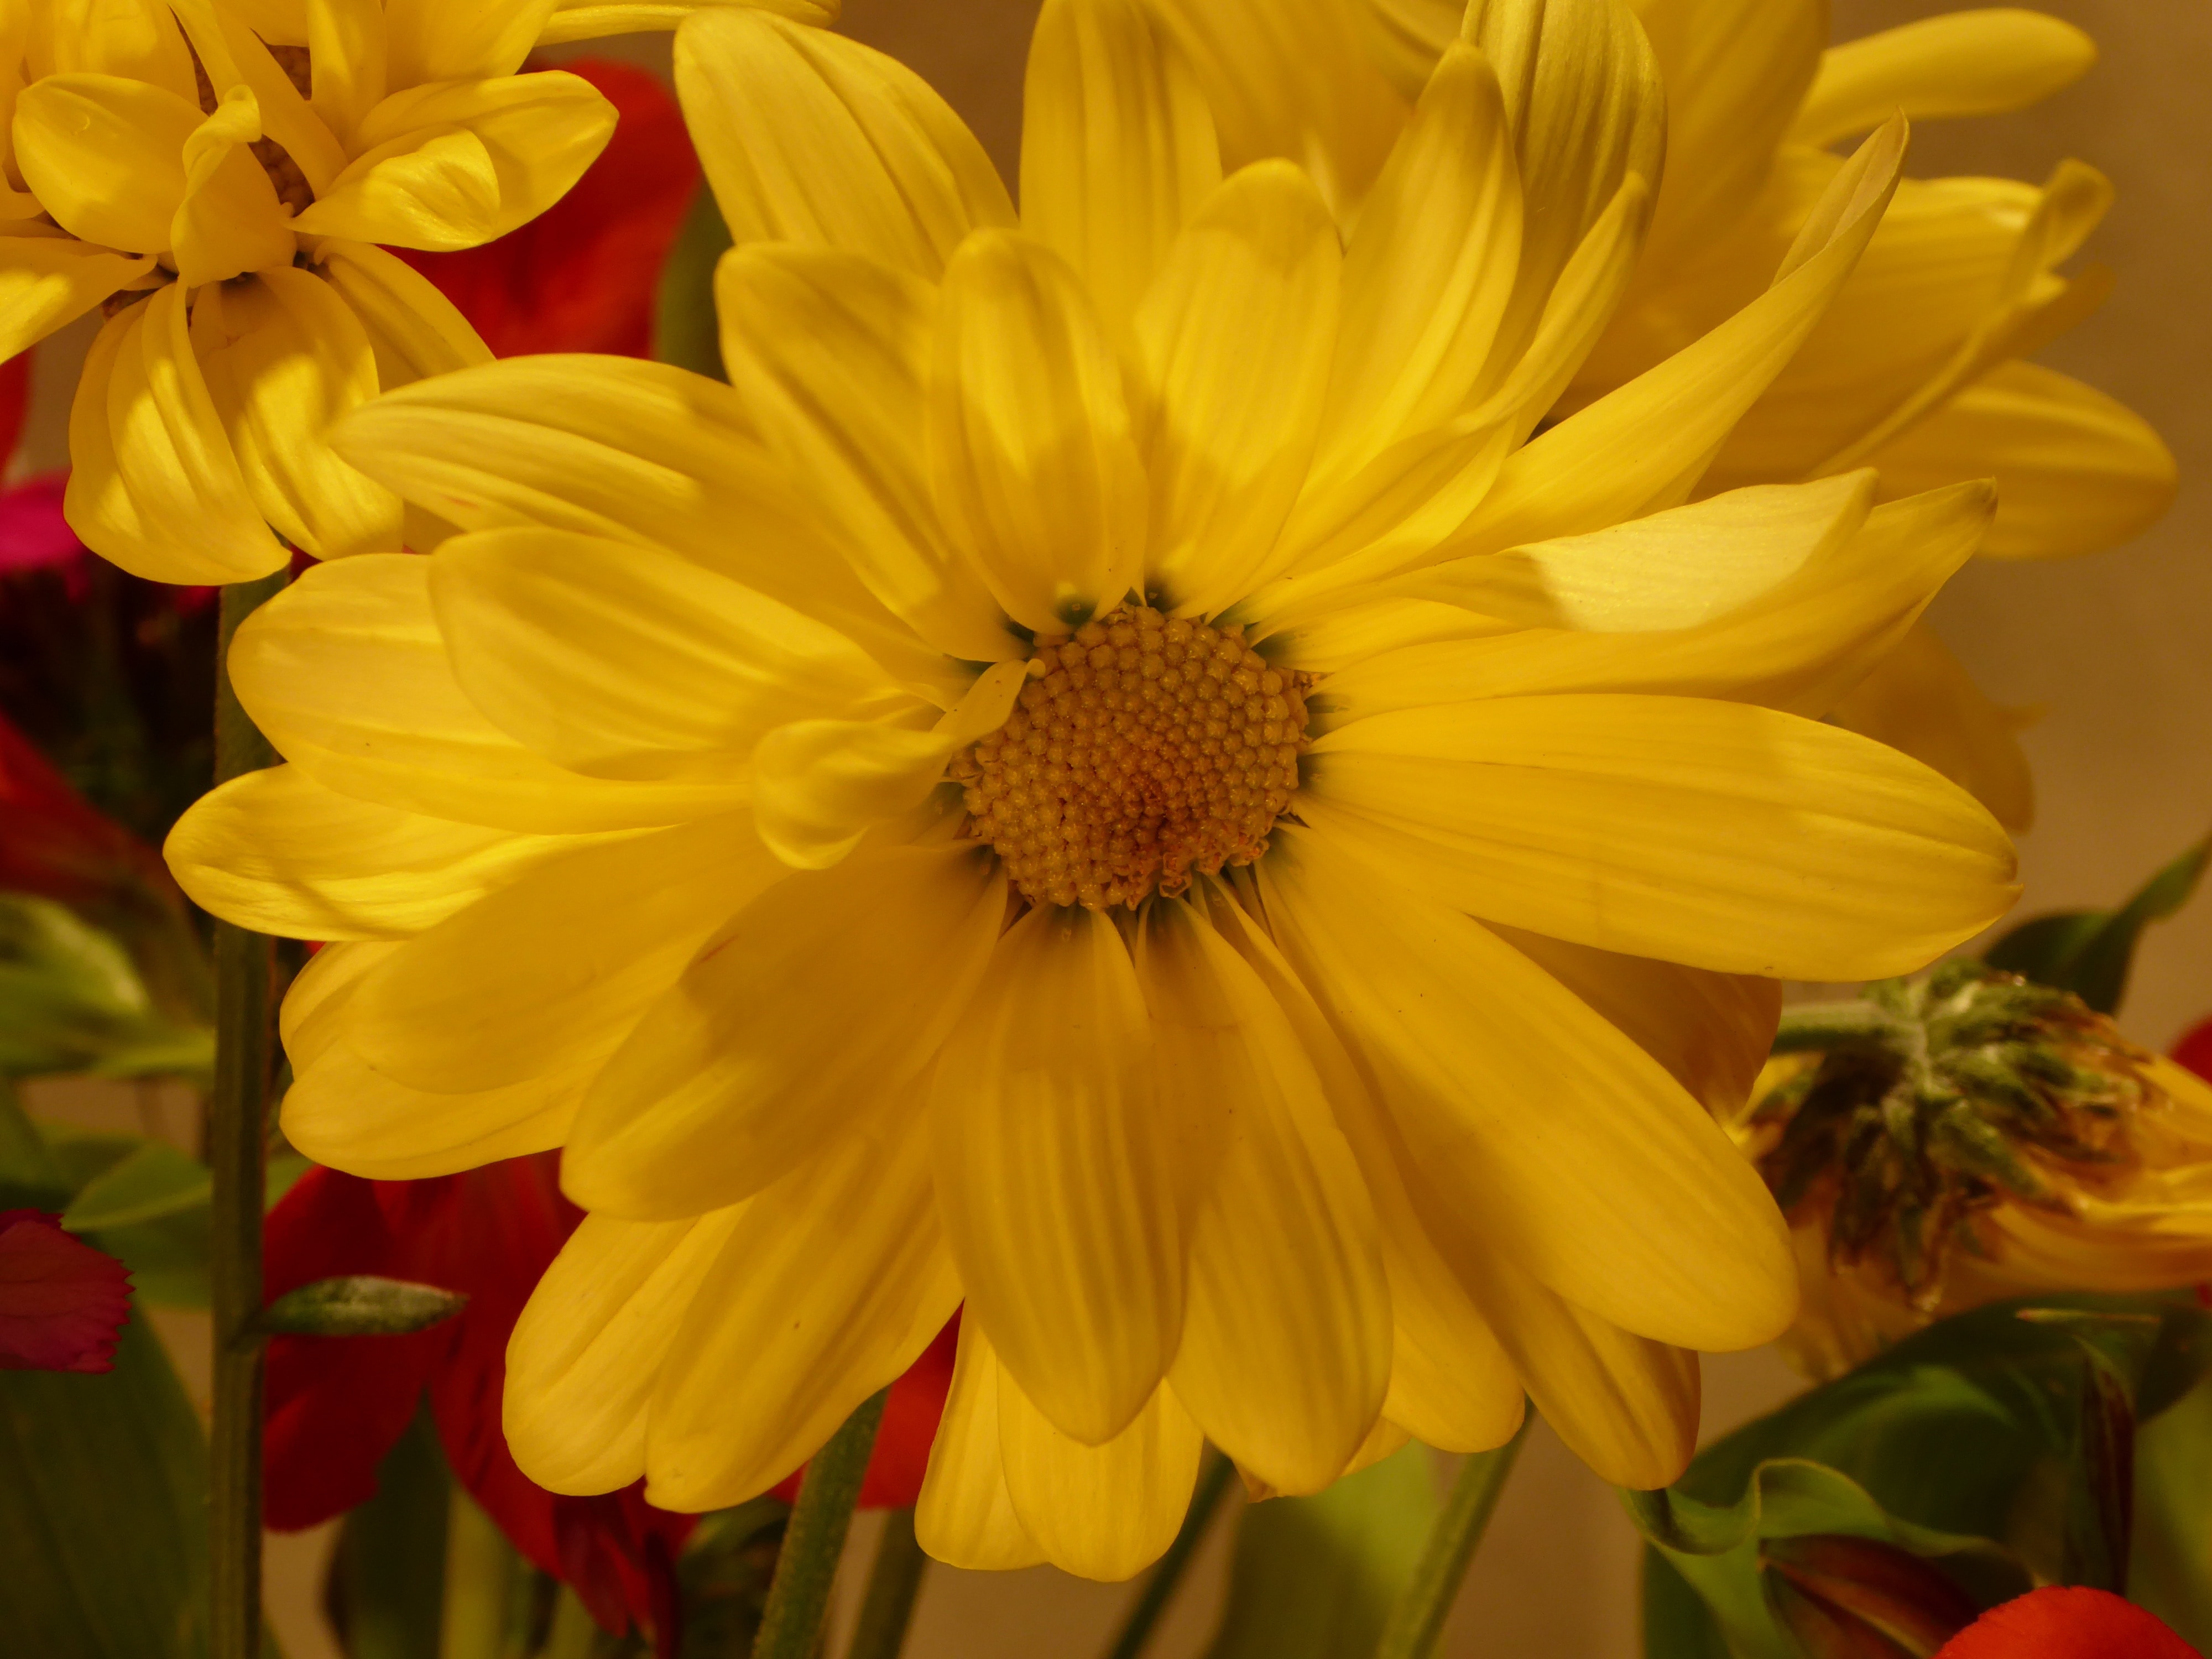 yellow clustered petal flower